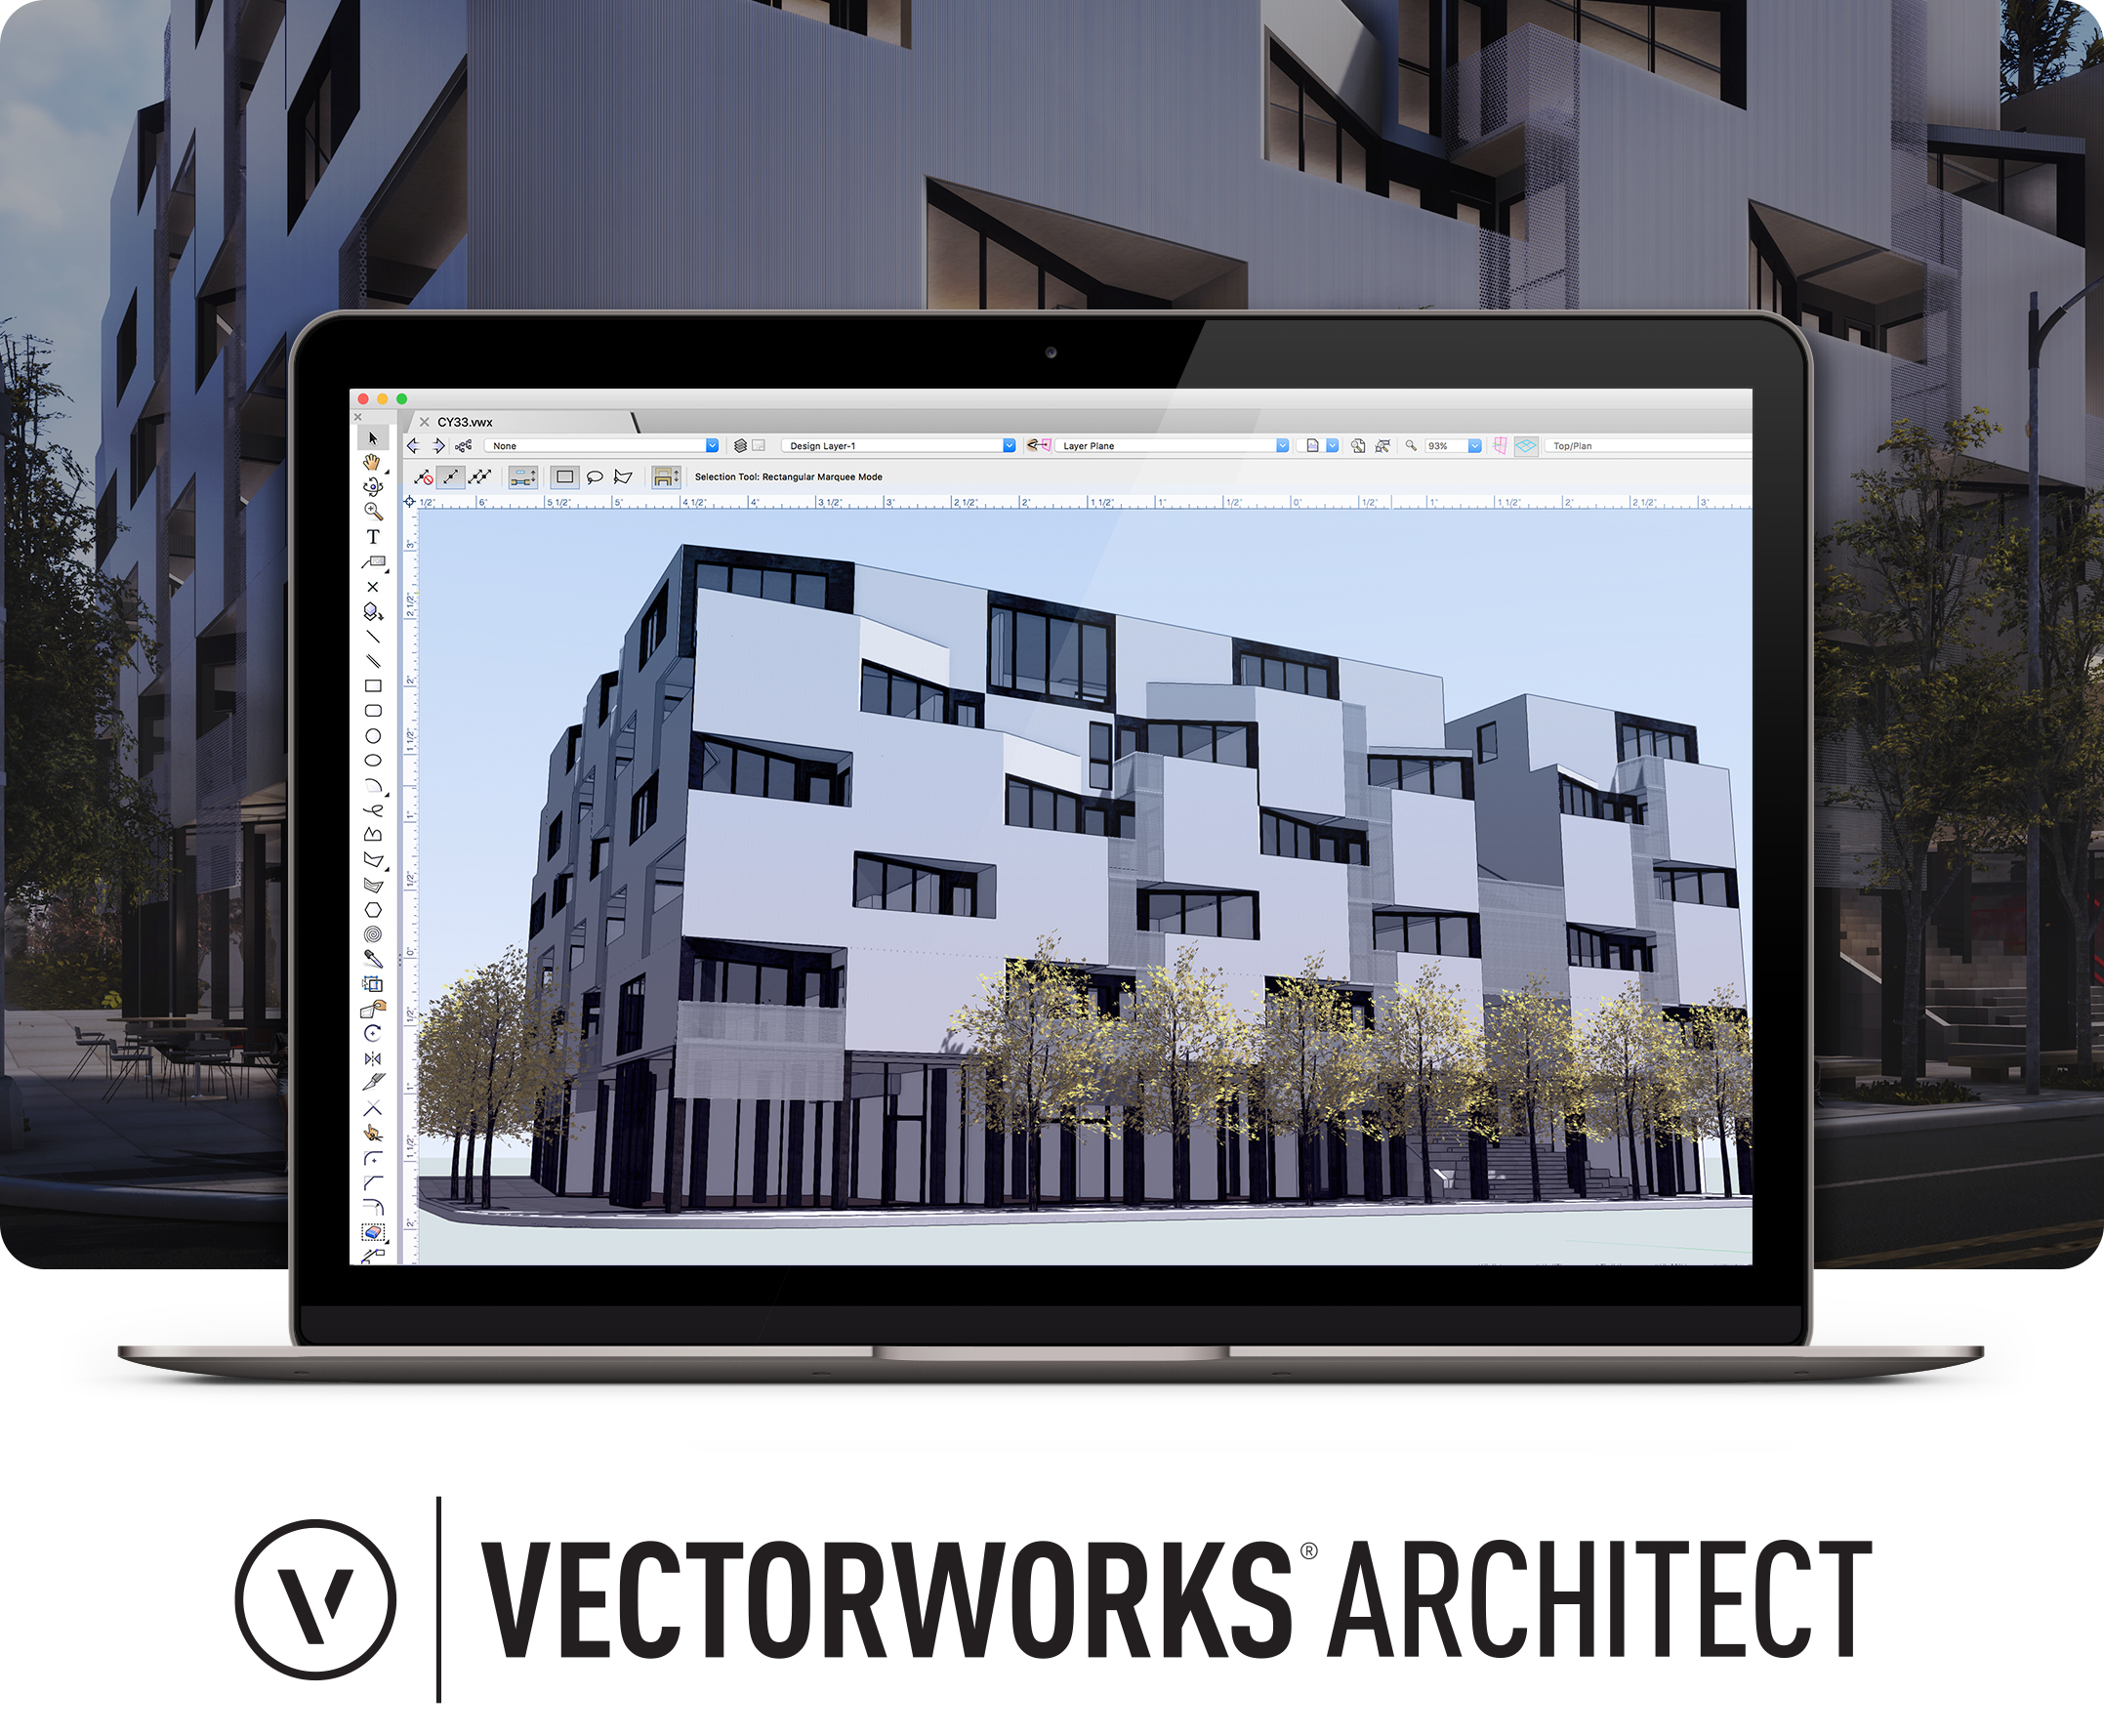 Vectorworks Architect 2019 Getting Started Tutorial